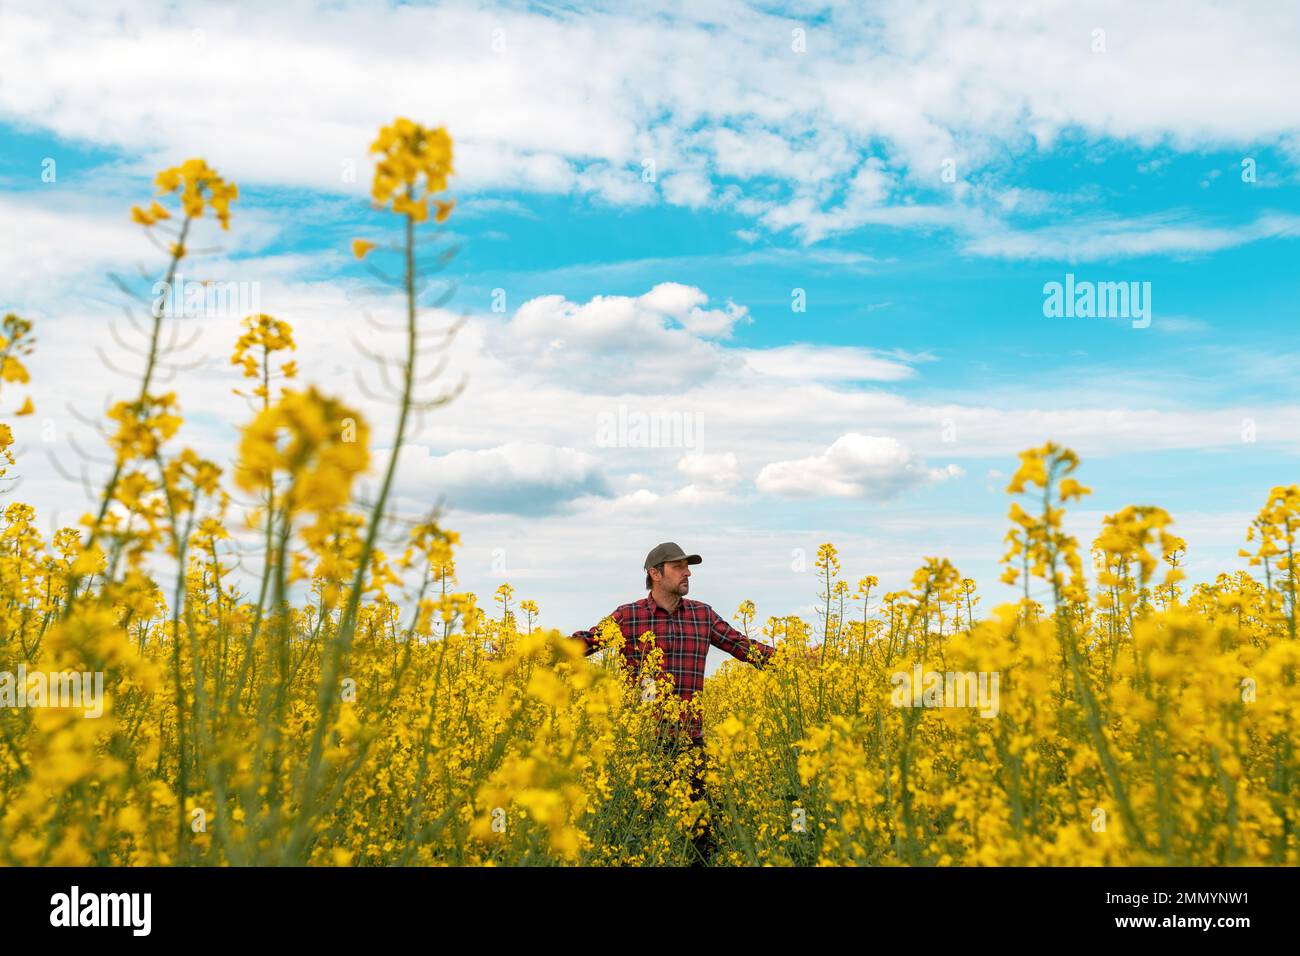 Farm worker wearing red plaid shirt and trucker's hat standing in cultivated rapeseed field in bloom and looking over crops, selective focus Stock Photo